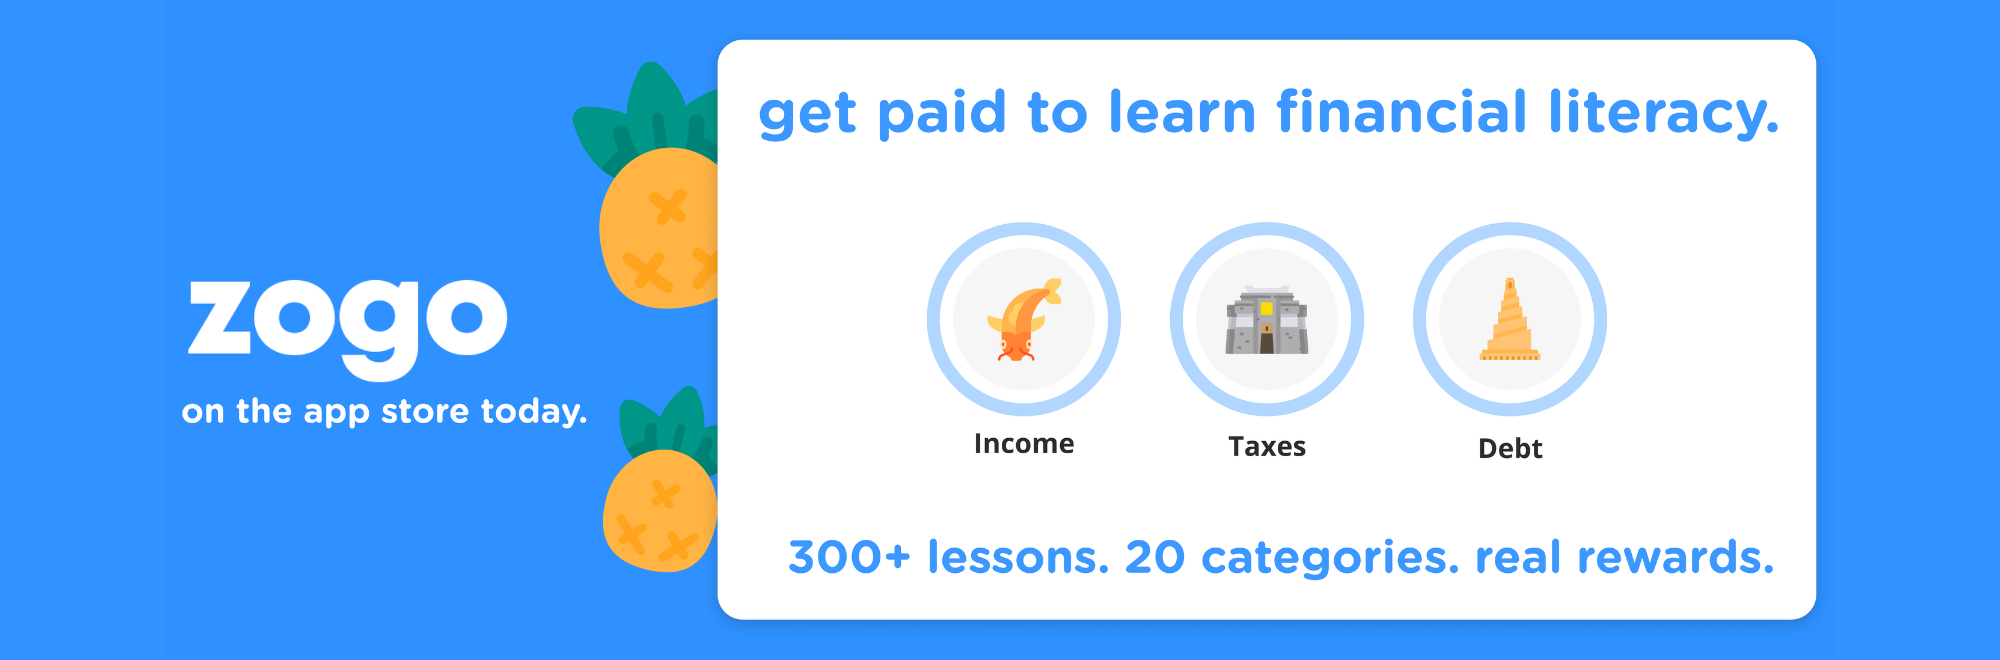 zogo on the app store today. get paid to learn financial literacy. 300+ lessons. 20 categories. real rewards.